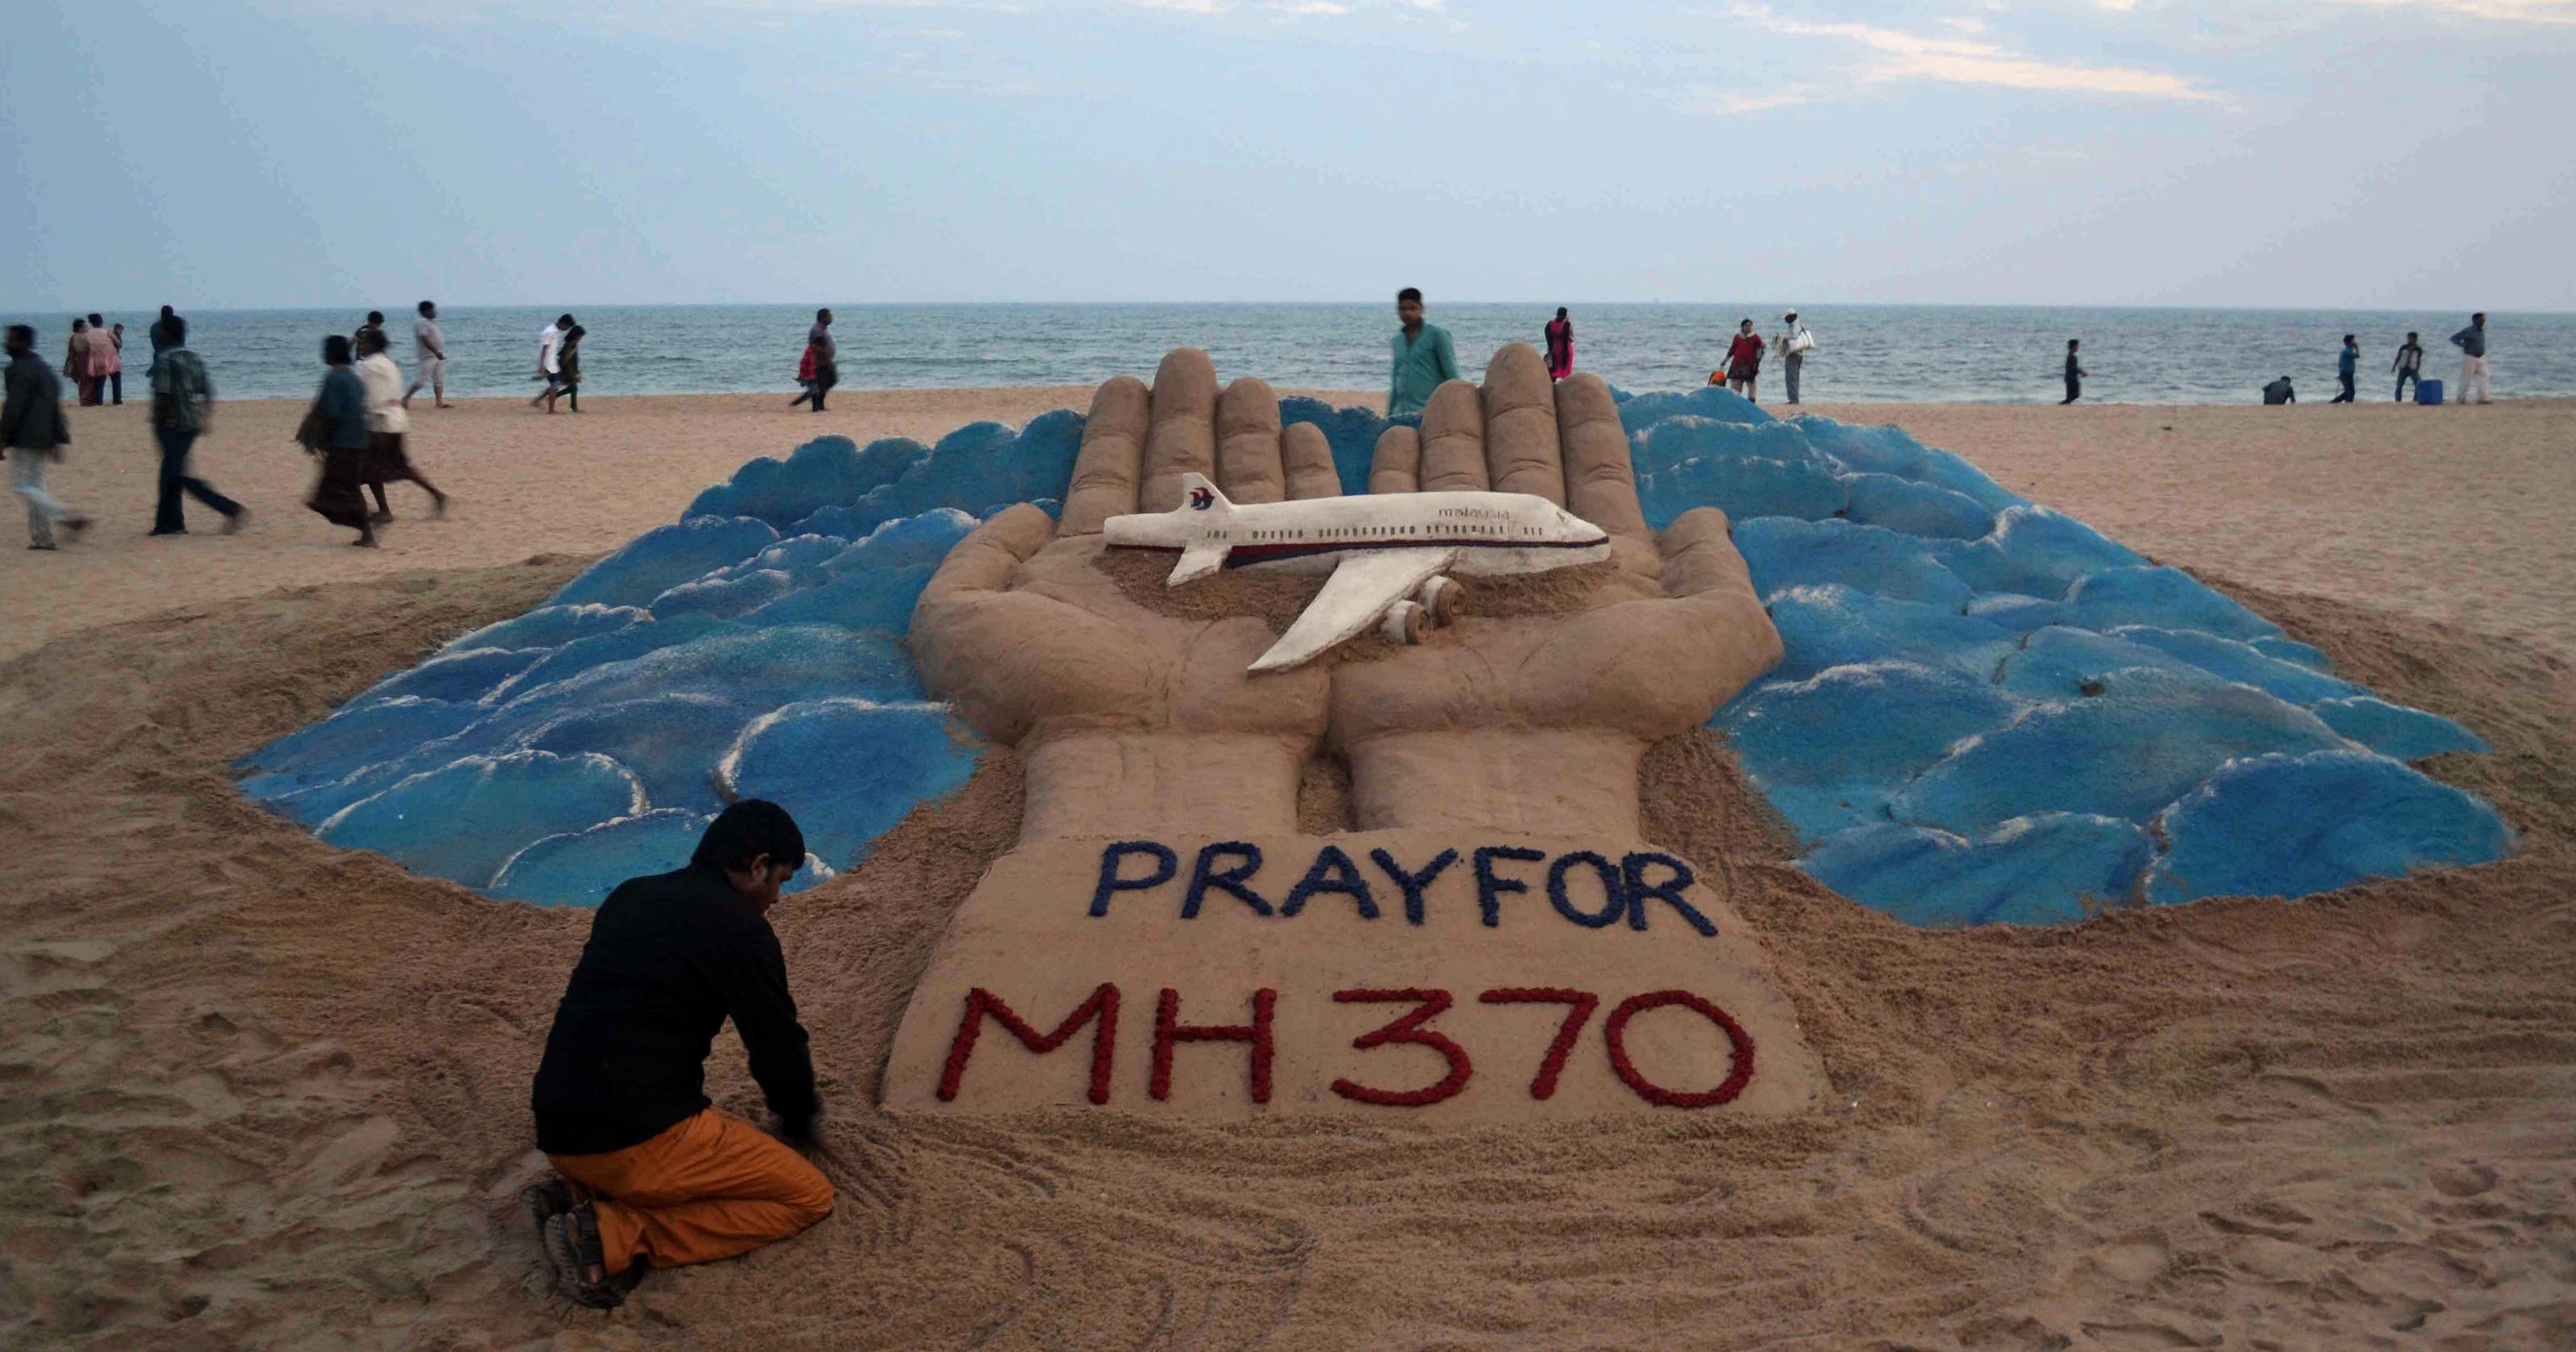 6 theories on what happened to Malaysia Flight 370